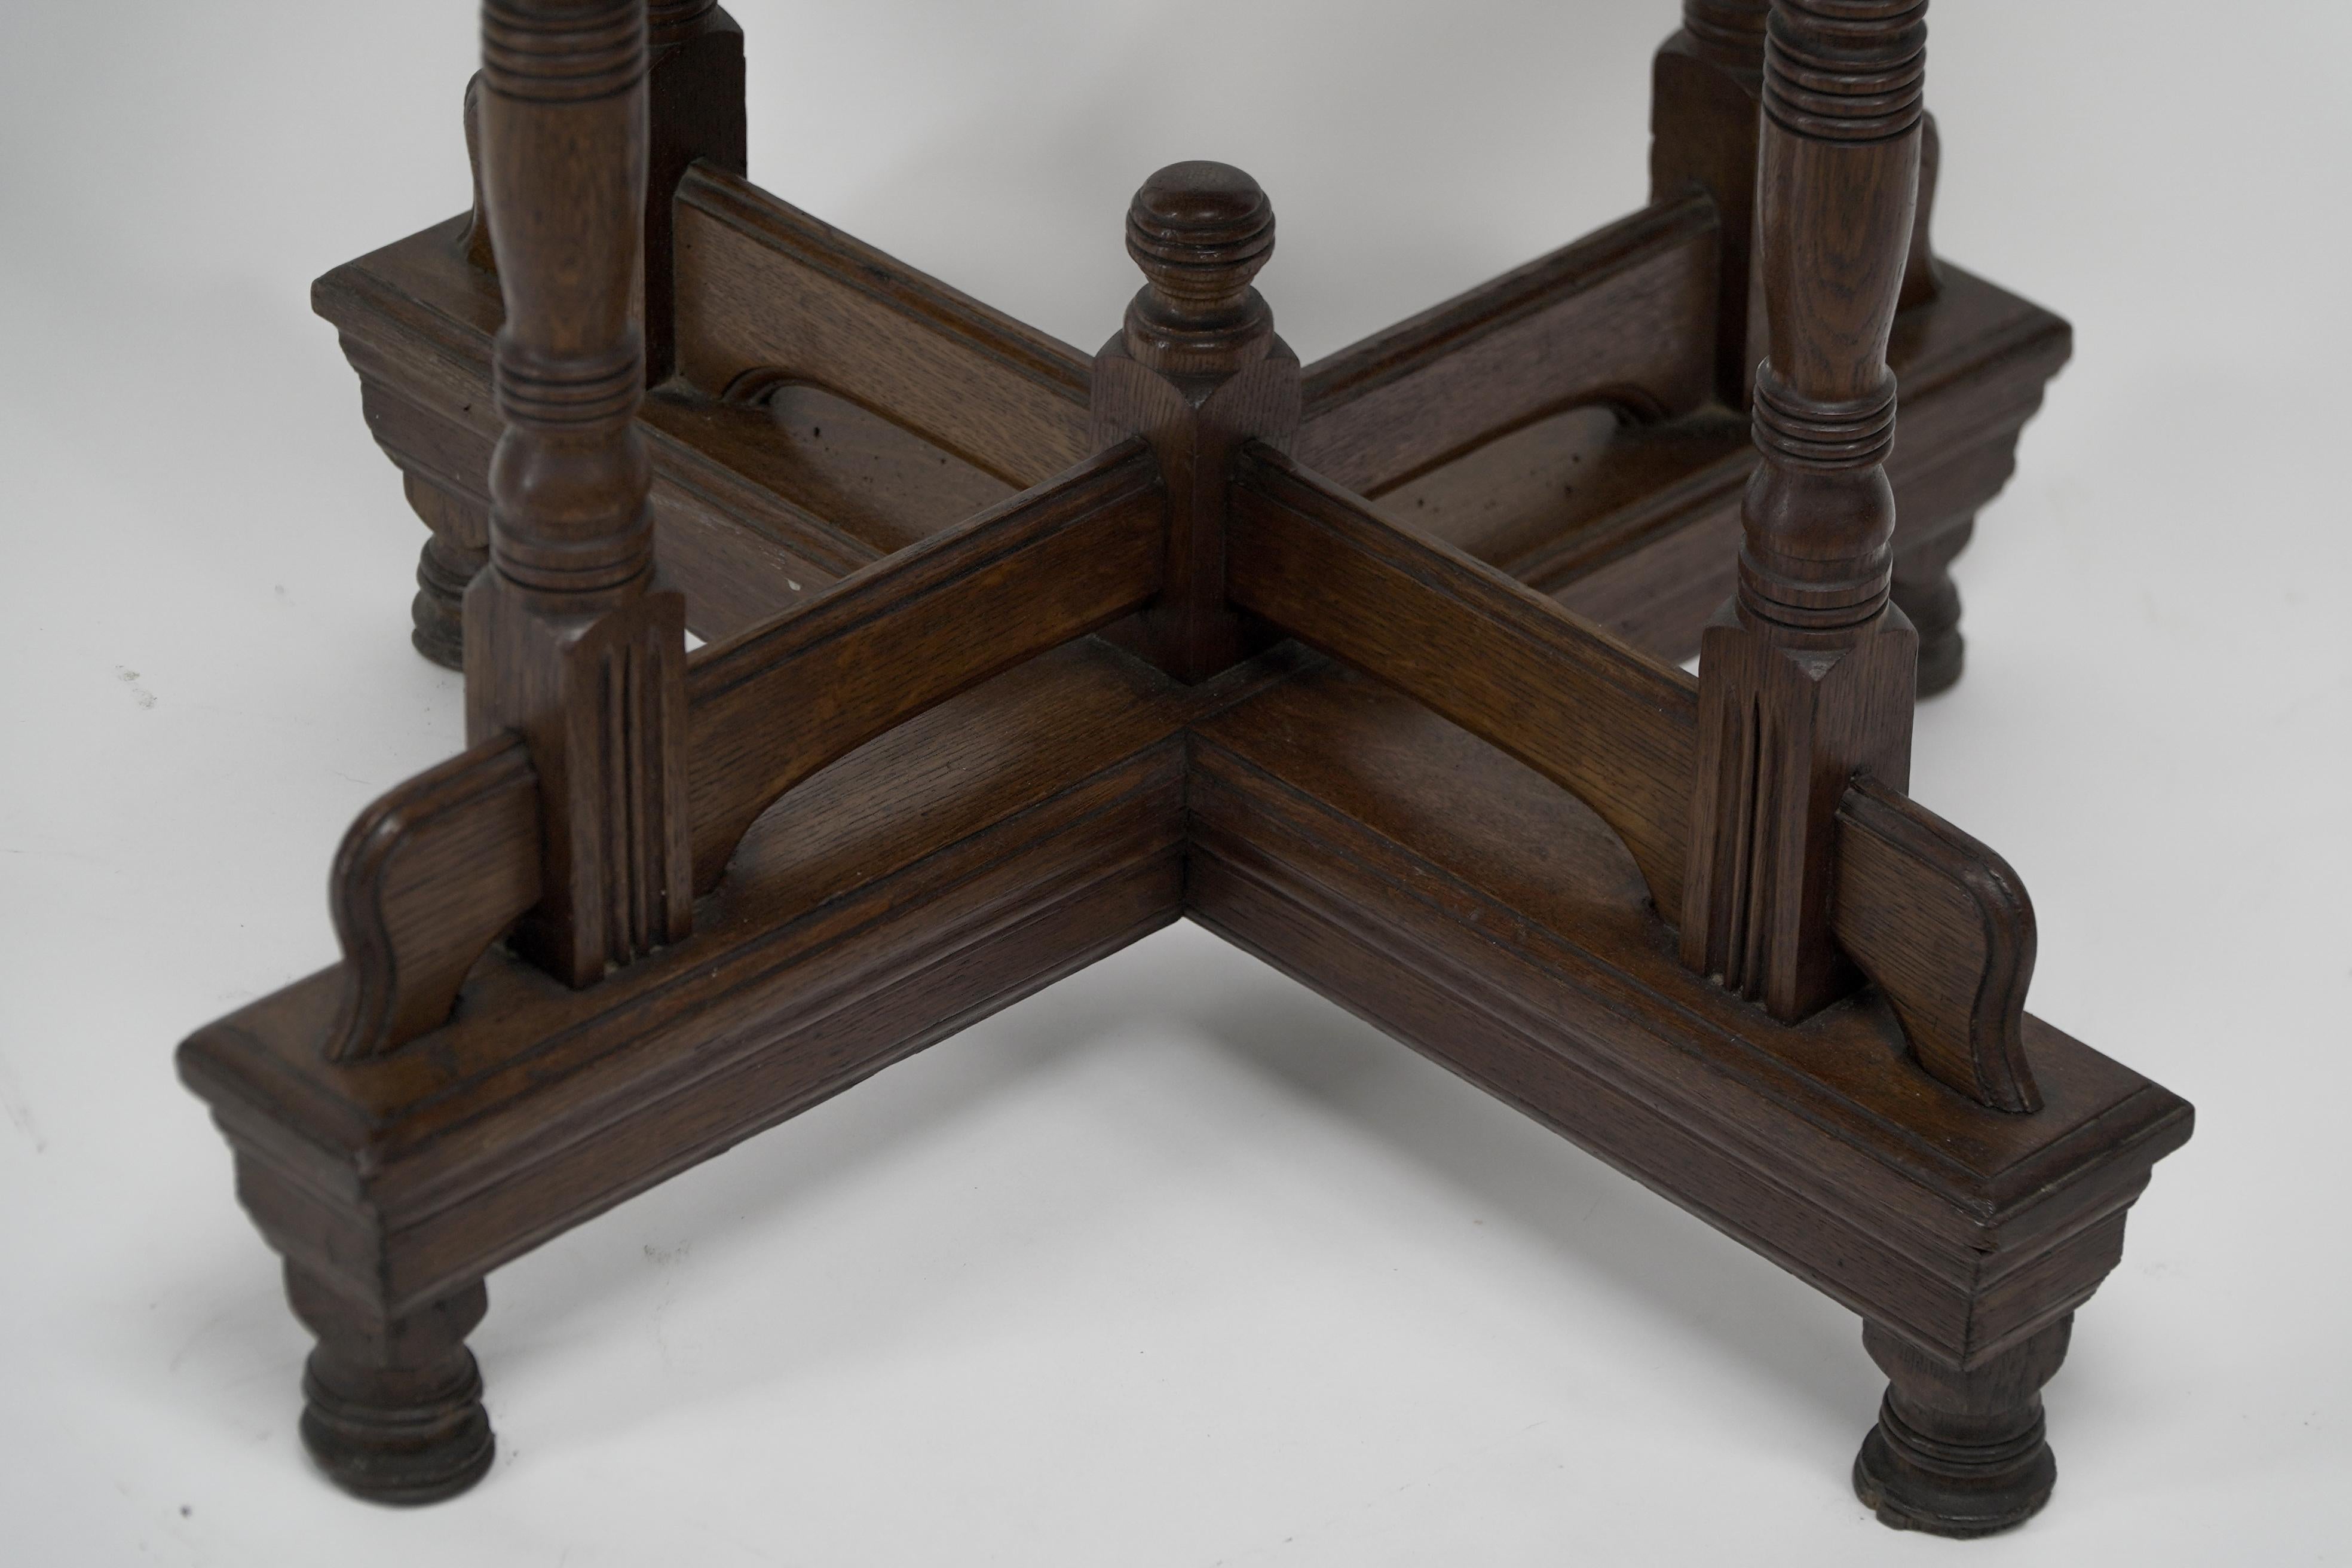 Alfred Waterhouse. A Gothic Revival oak side table with double cross stretchers. For Sale 3